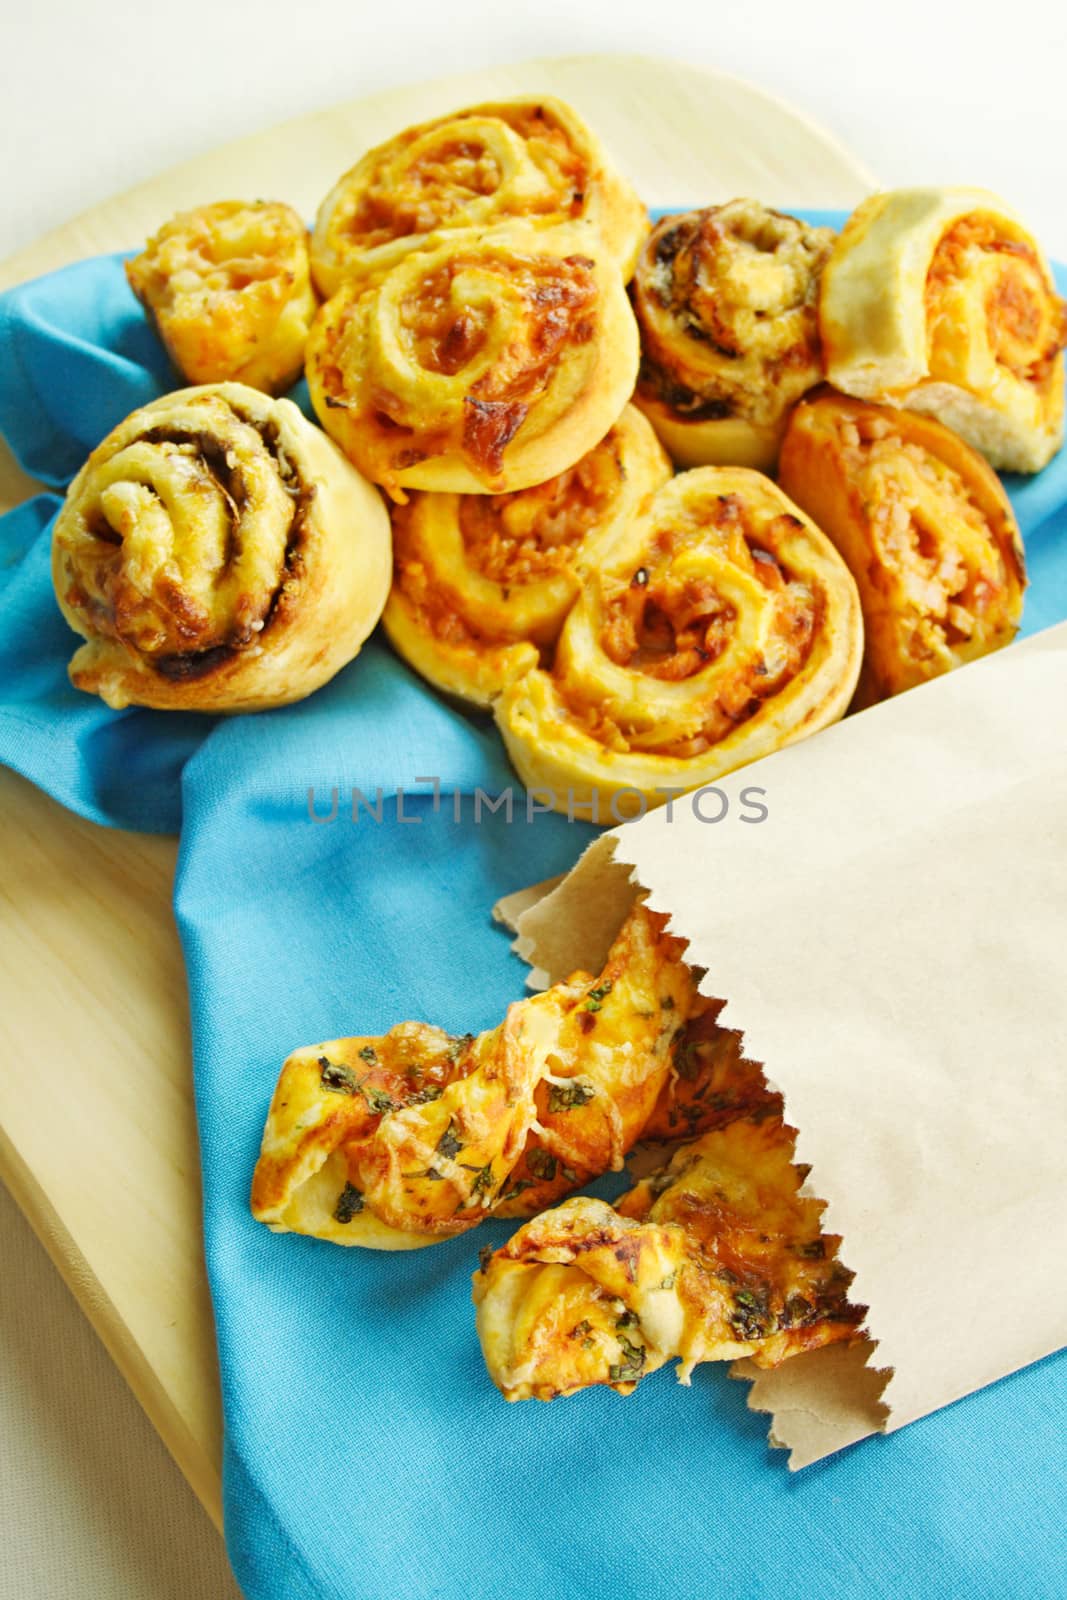 A selection of baked treats including tomato and herb sticks in a paper bag and baked scrolls.